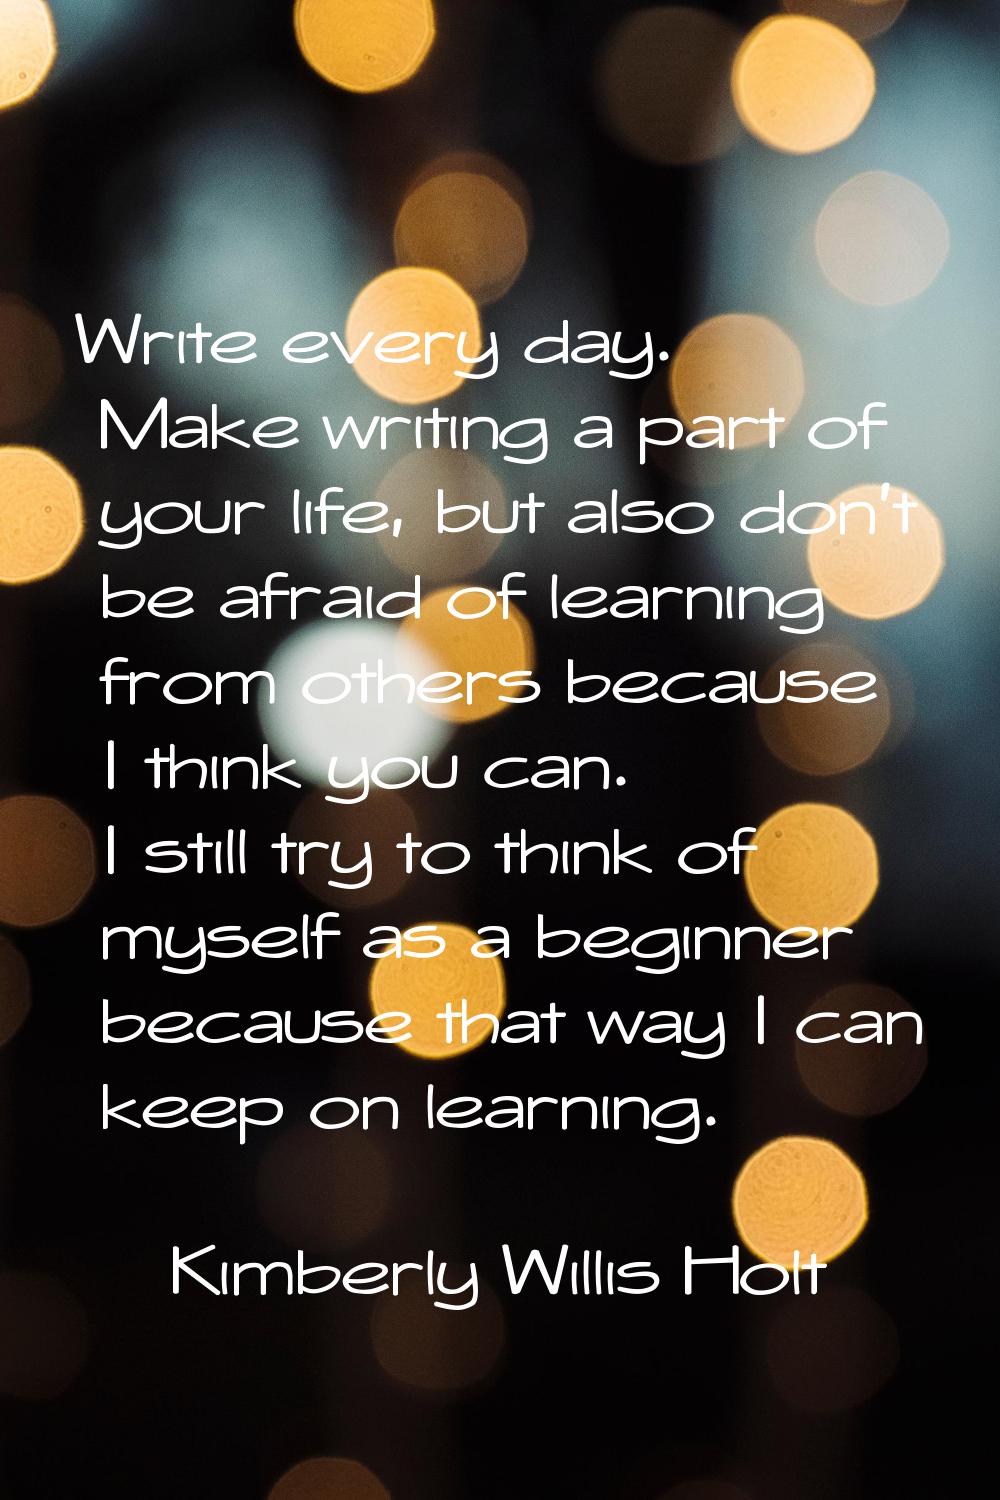 Write every day. Make writing a part of your life, but also don't be afraid of learning from others